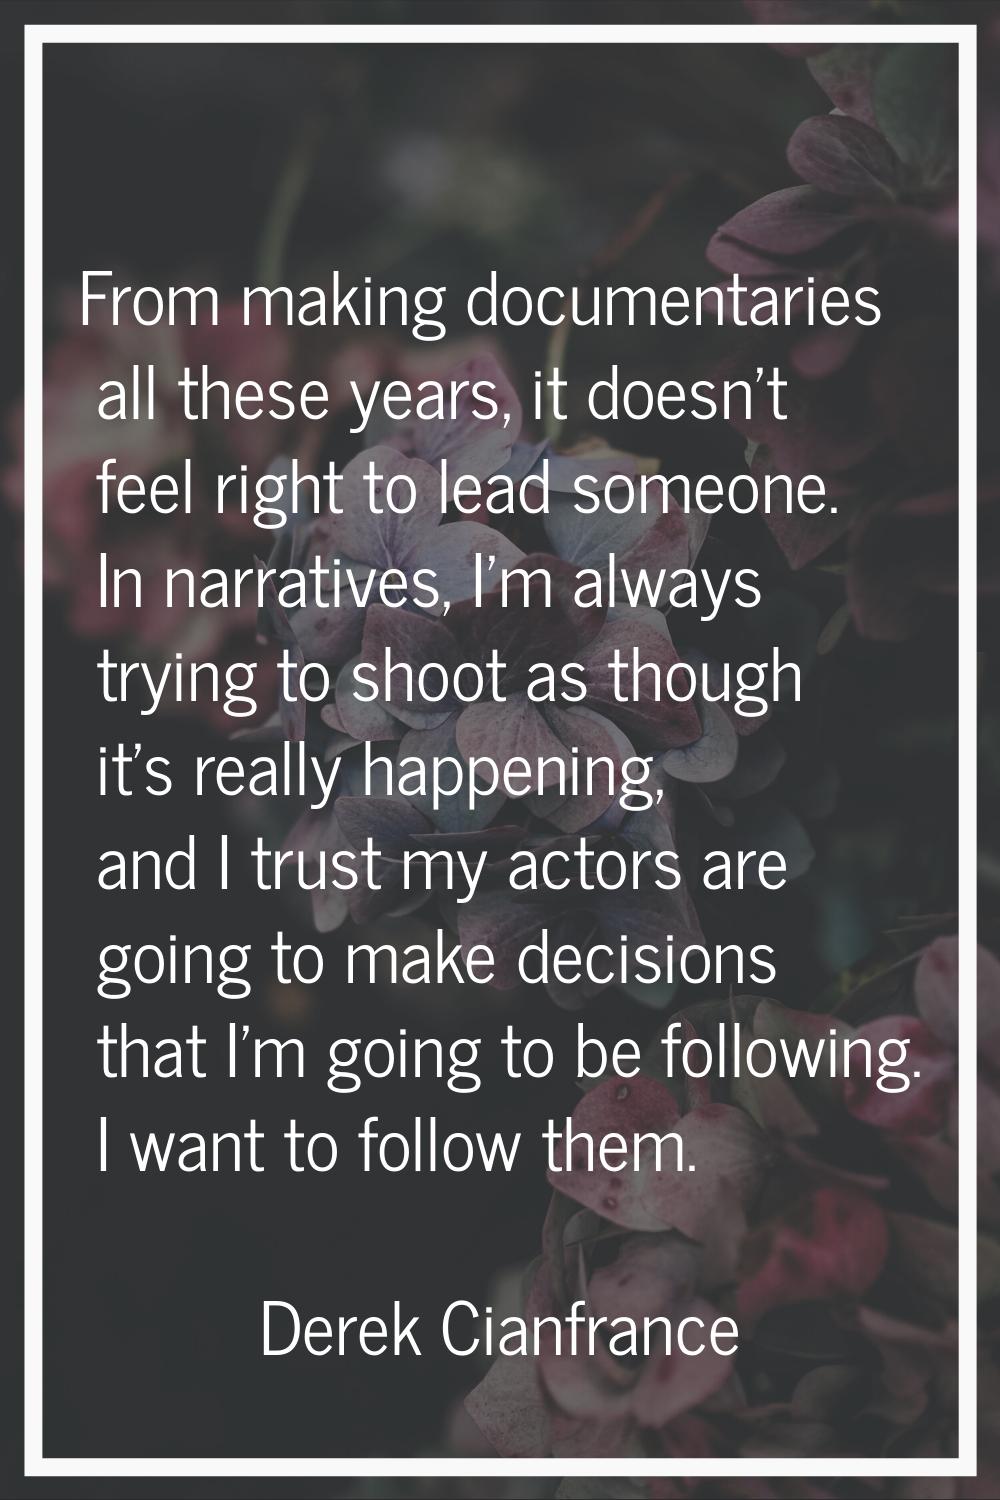 From making documentaries all these years, it doesn't feel right to lead someone. In narratives, I'